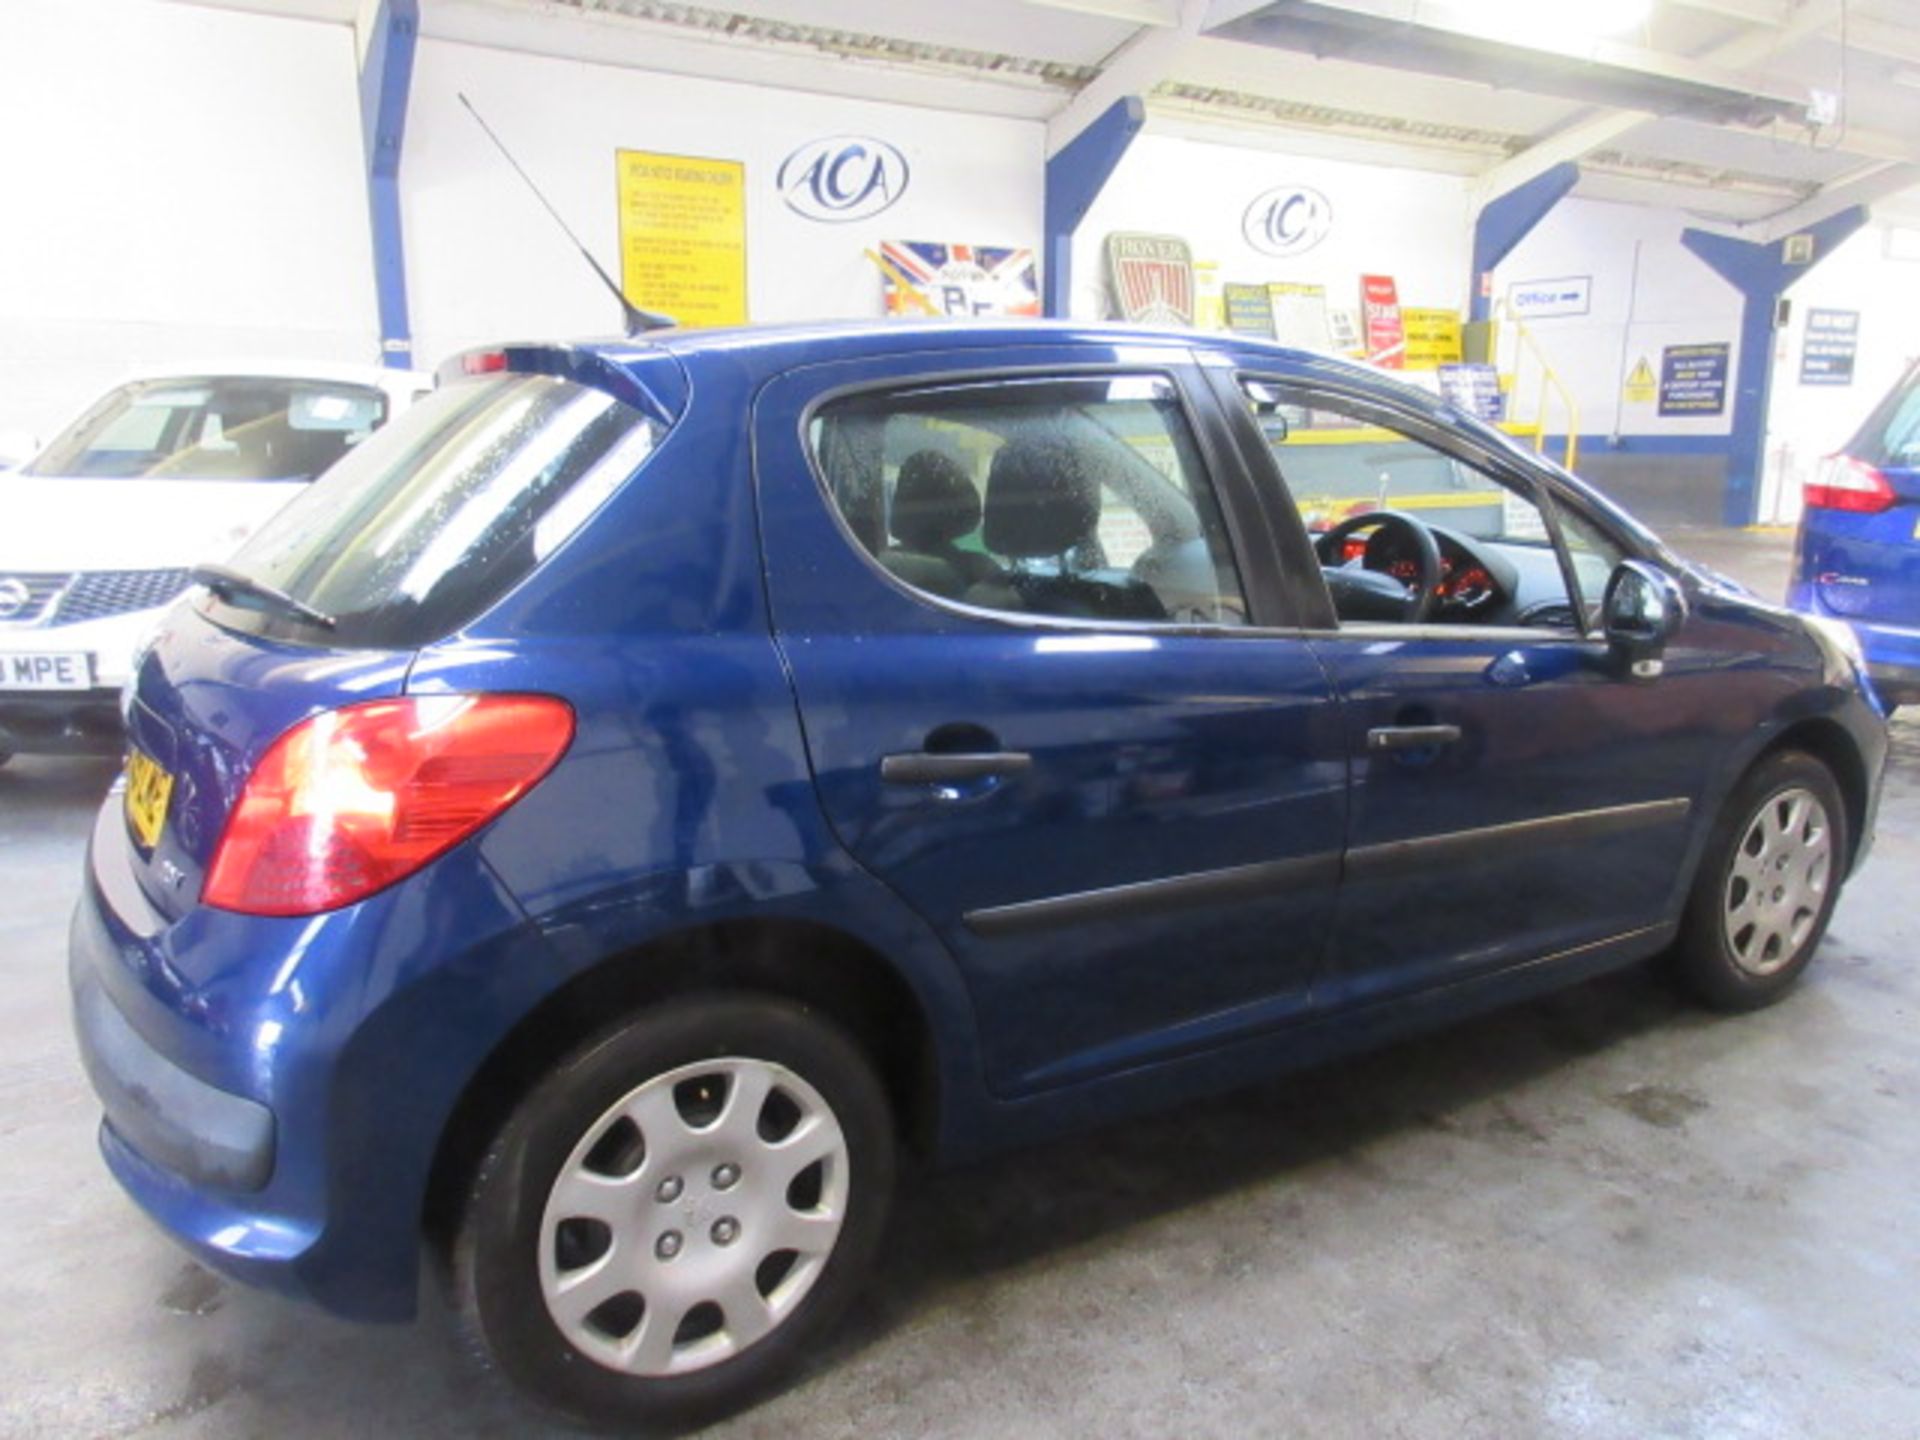 59 09 Peugeot 207 XE - Image 6 of 16